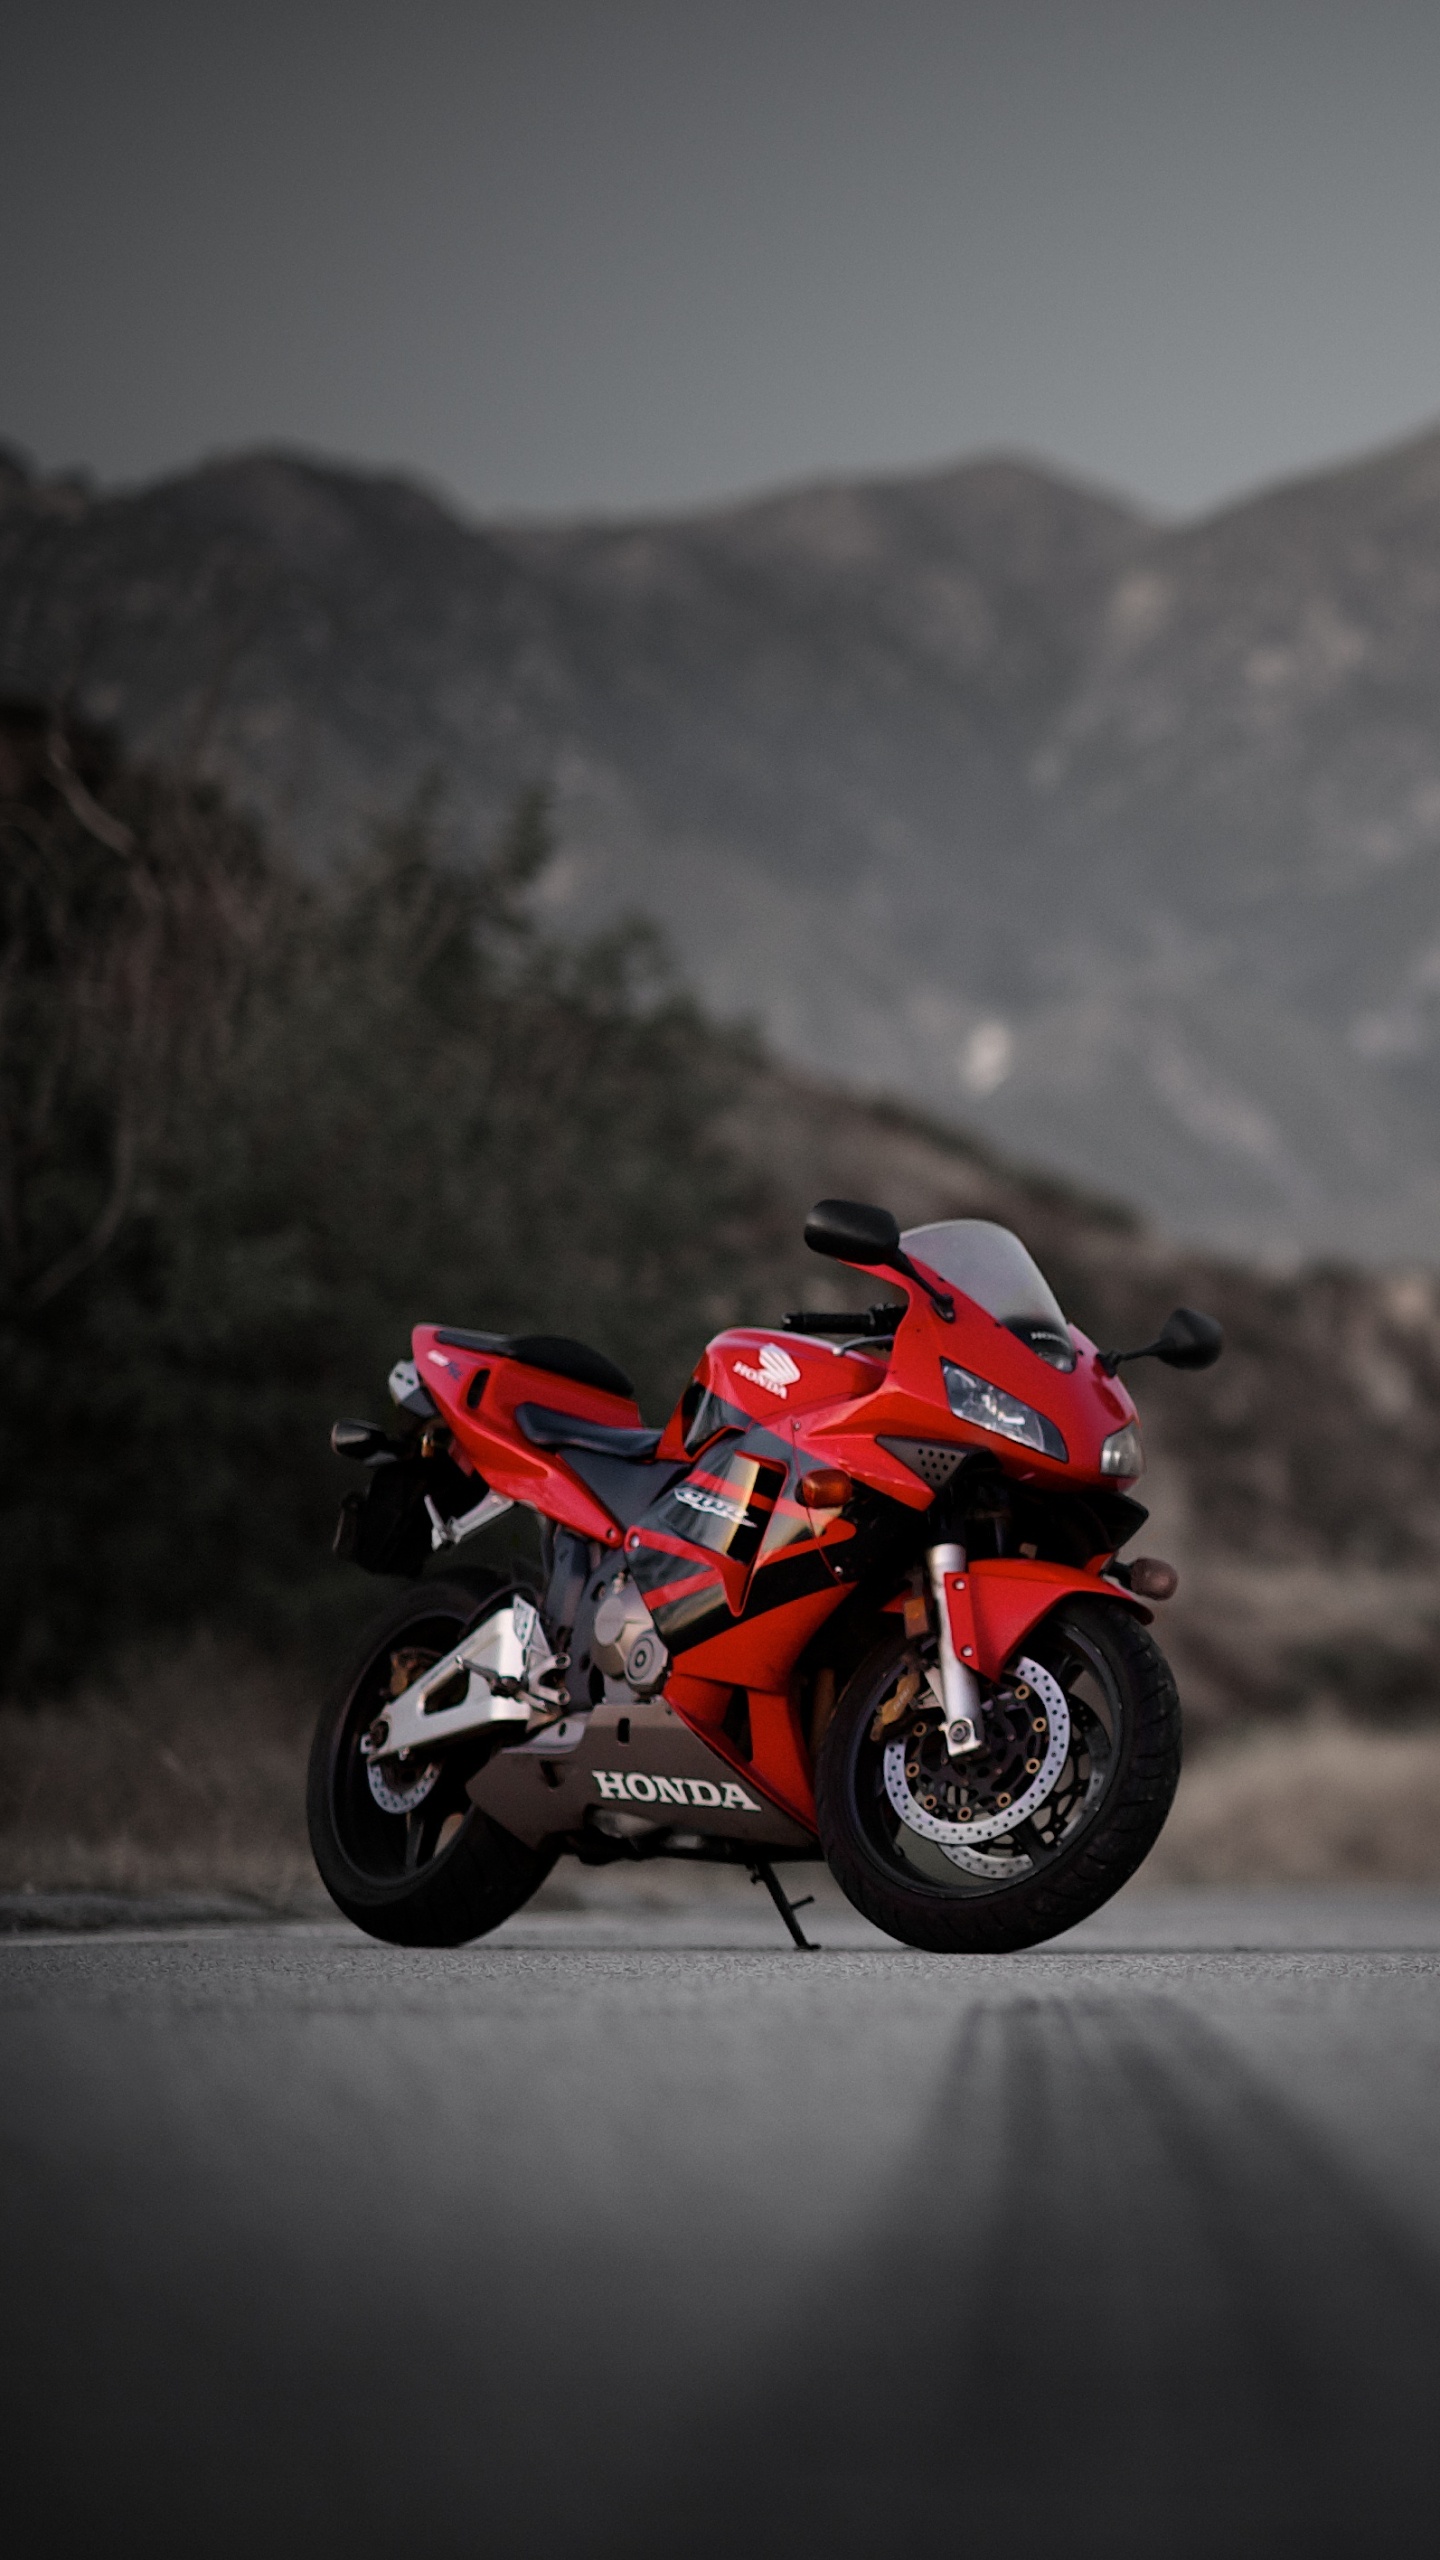 Red and Black Sports Bike on Road During Daytime. Wallpaper in 1440x2560 Resolution